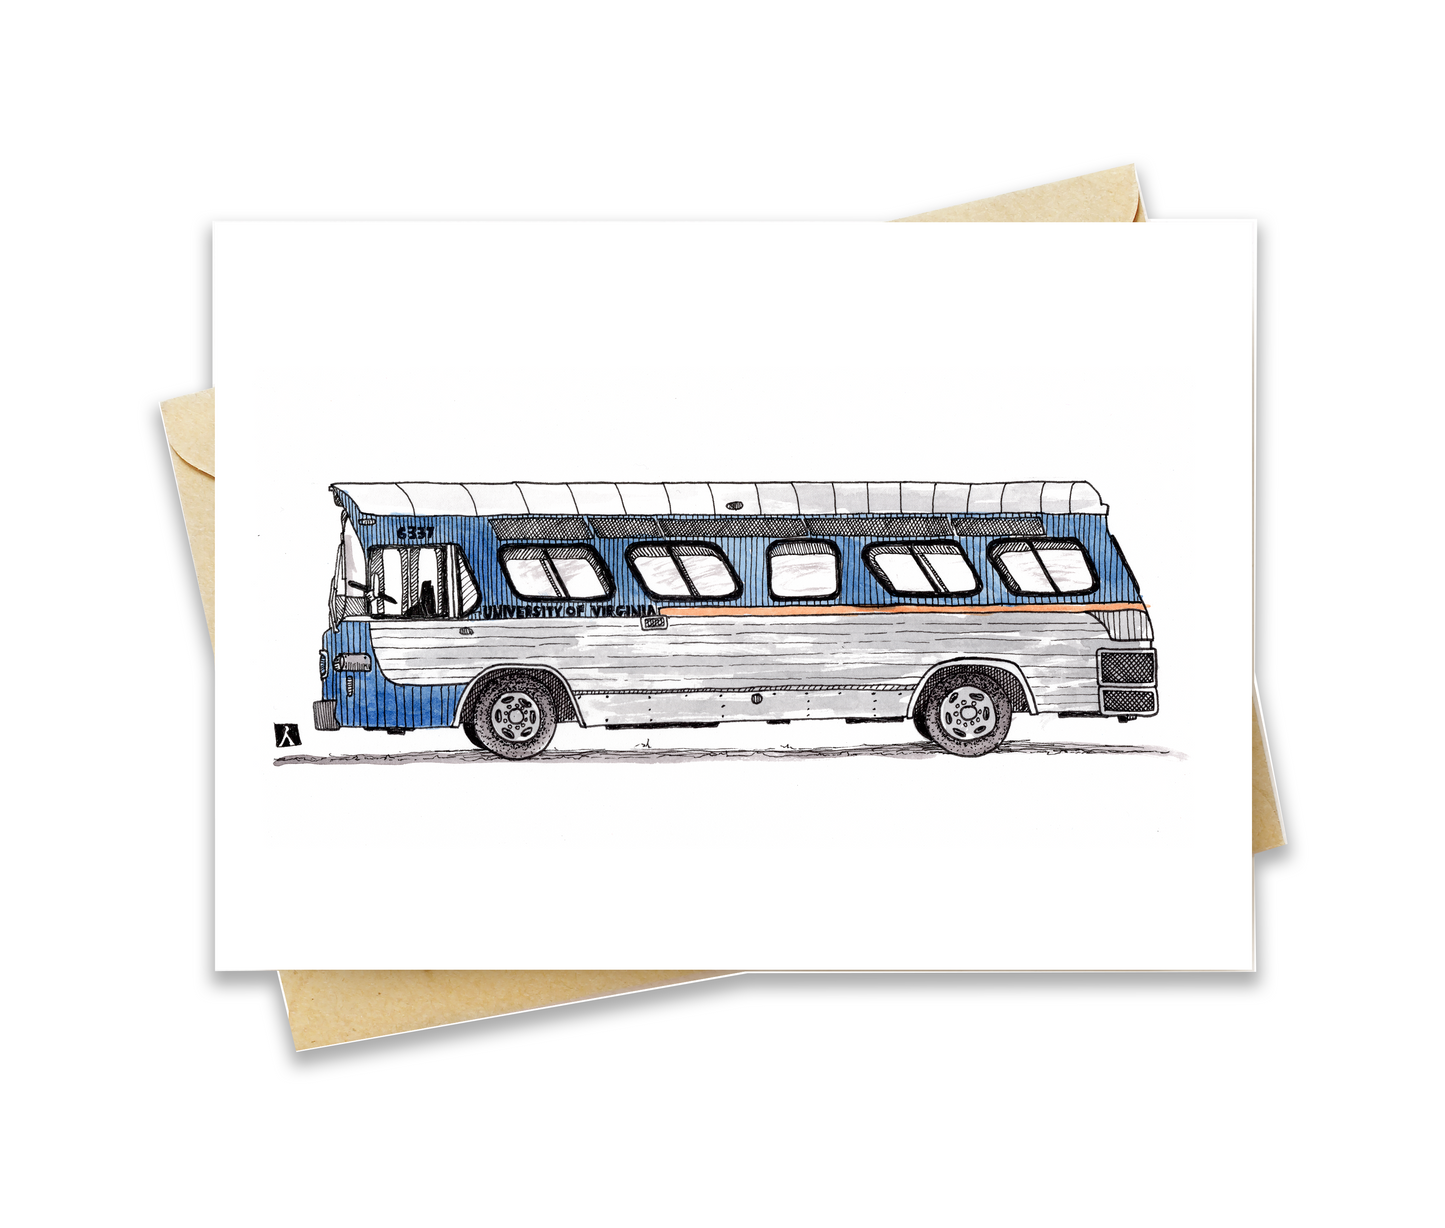 BellavanceInk: Greeting Card With A Pen & Ink Drawing Of A Vintage University Of Virginia Transit Bus 5 x 7 Inches (Officially Licensed